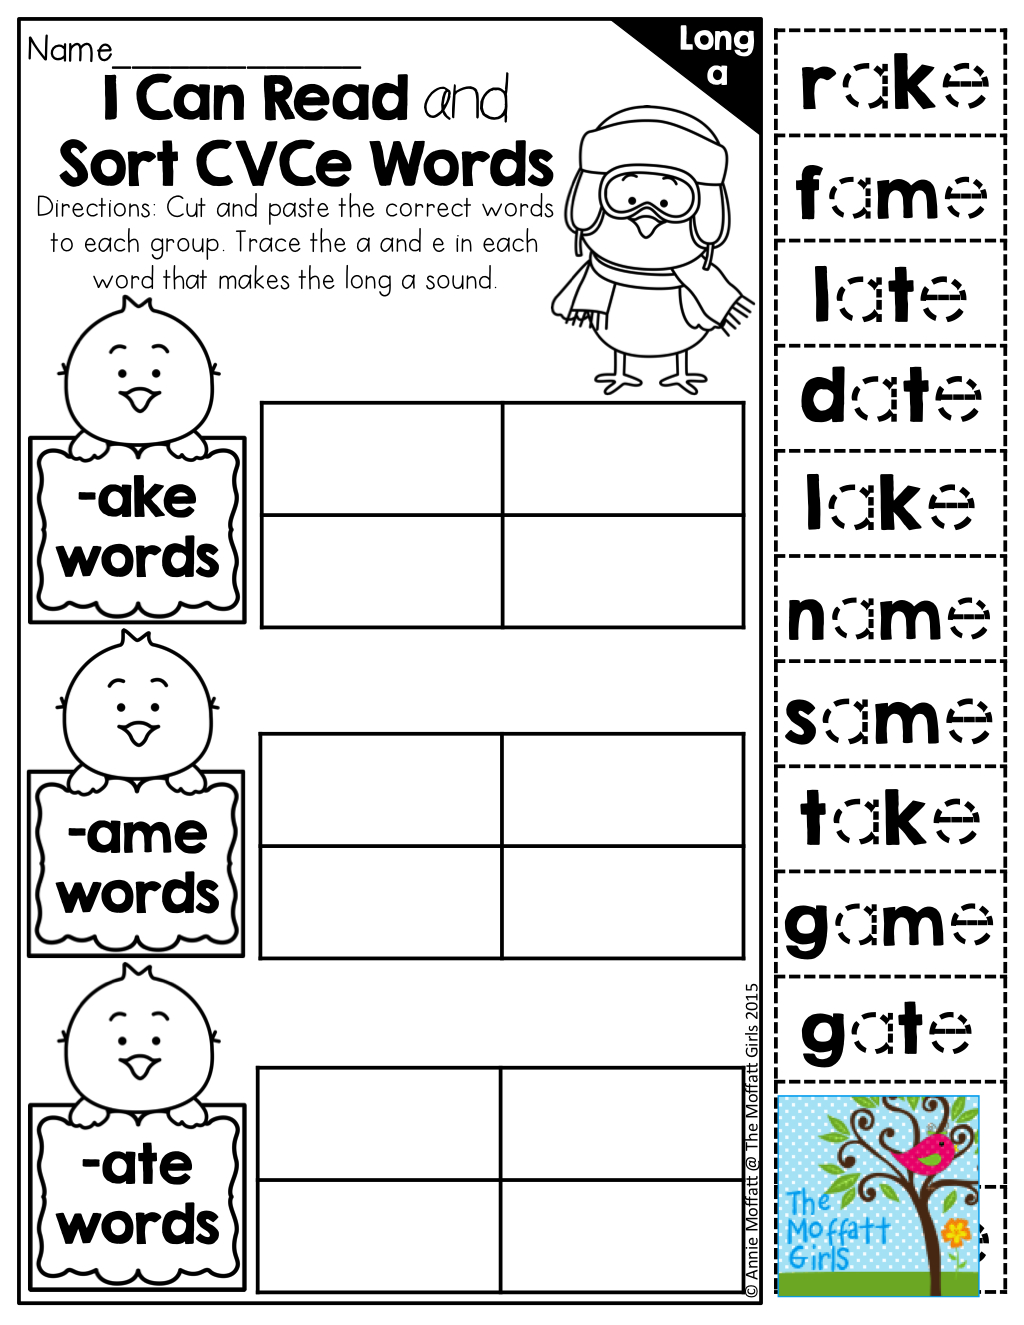 Silent E (Cvce Words) Cut And Paste- Trace To Show The Silent E | Magic E Worksheets Free Printable